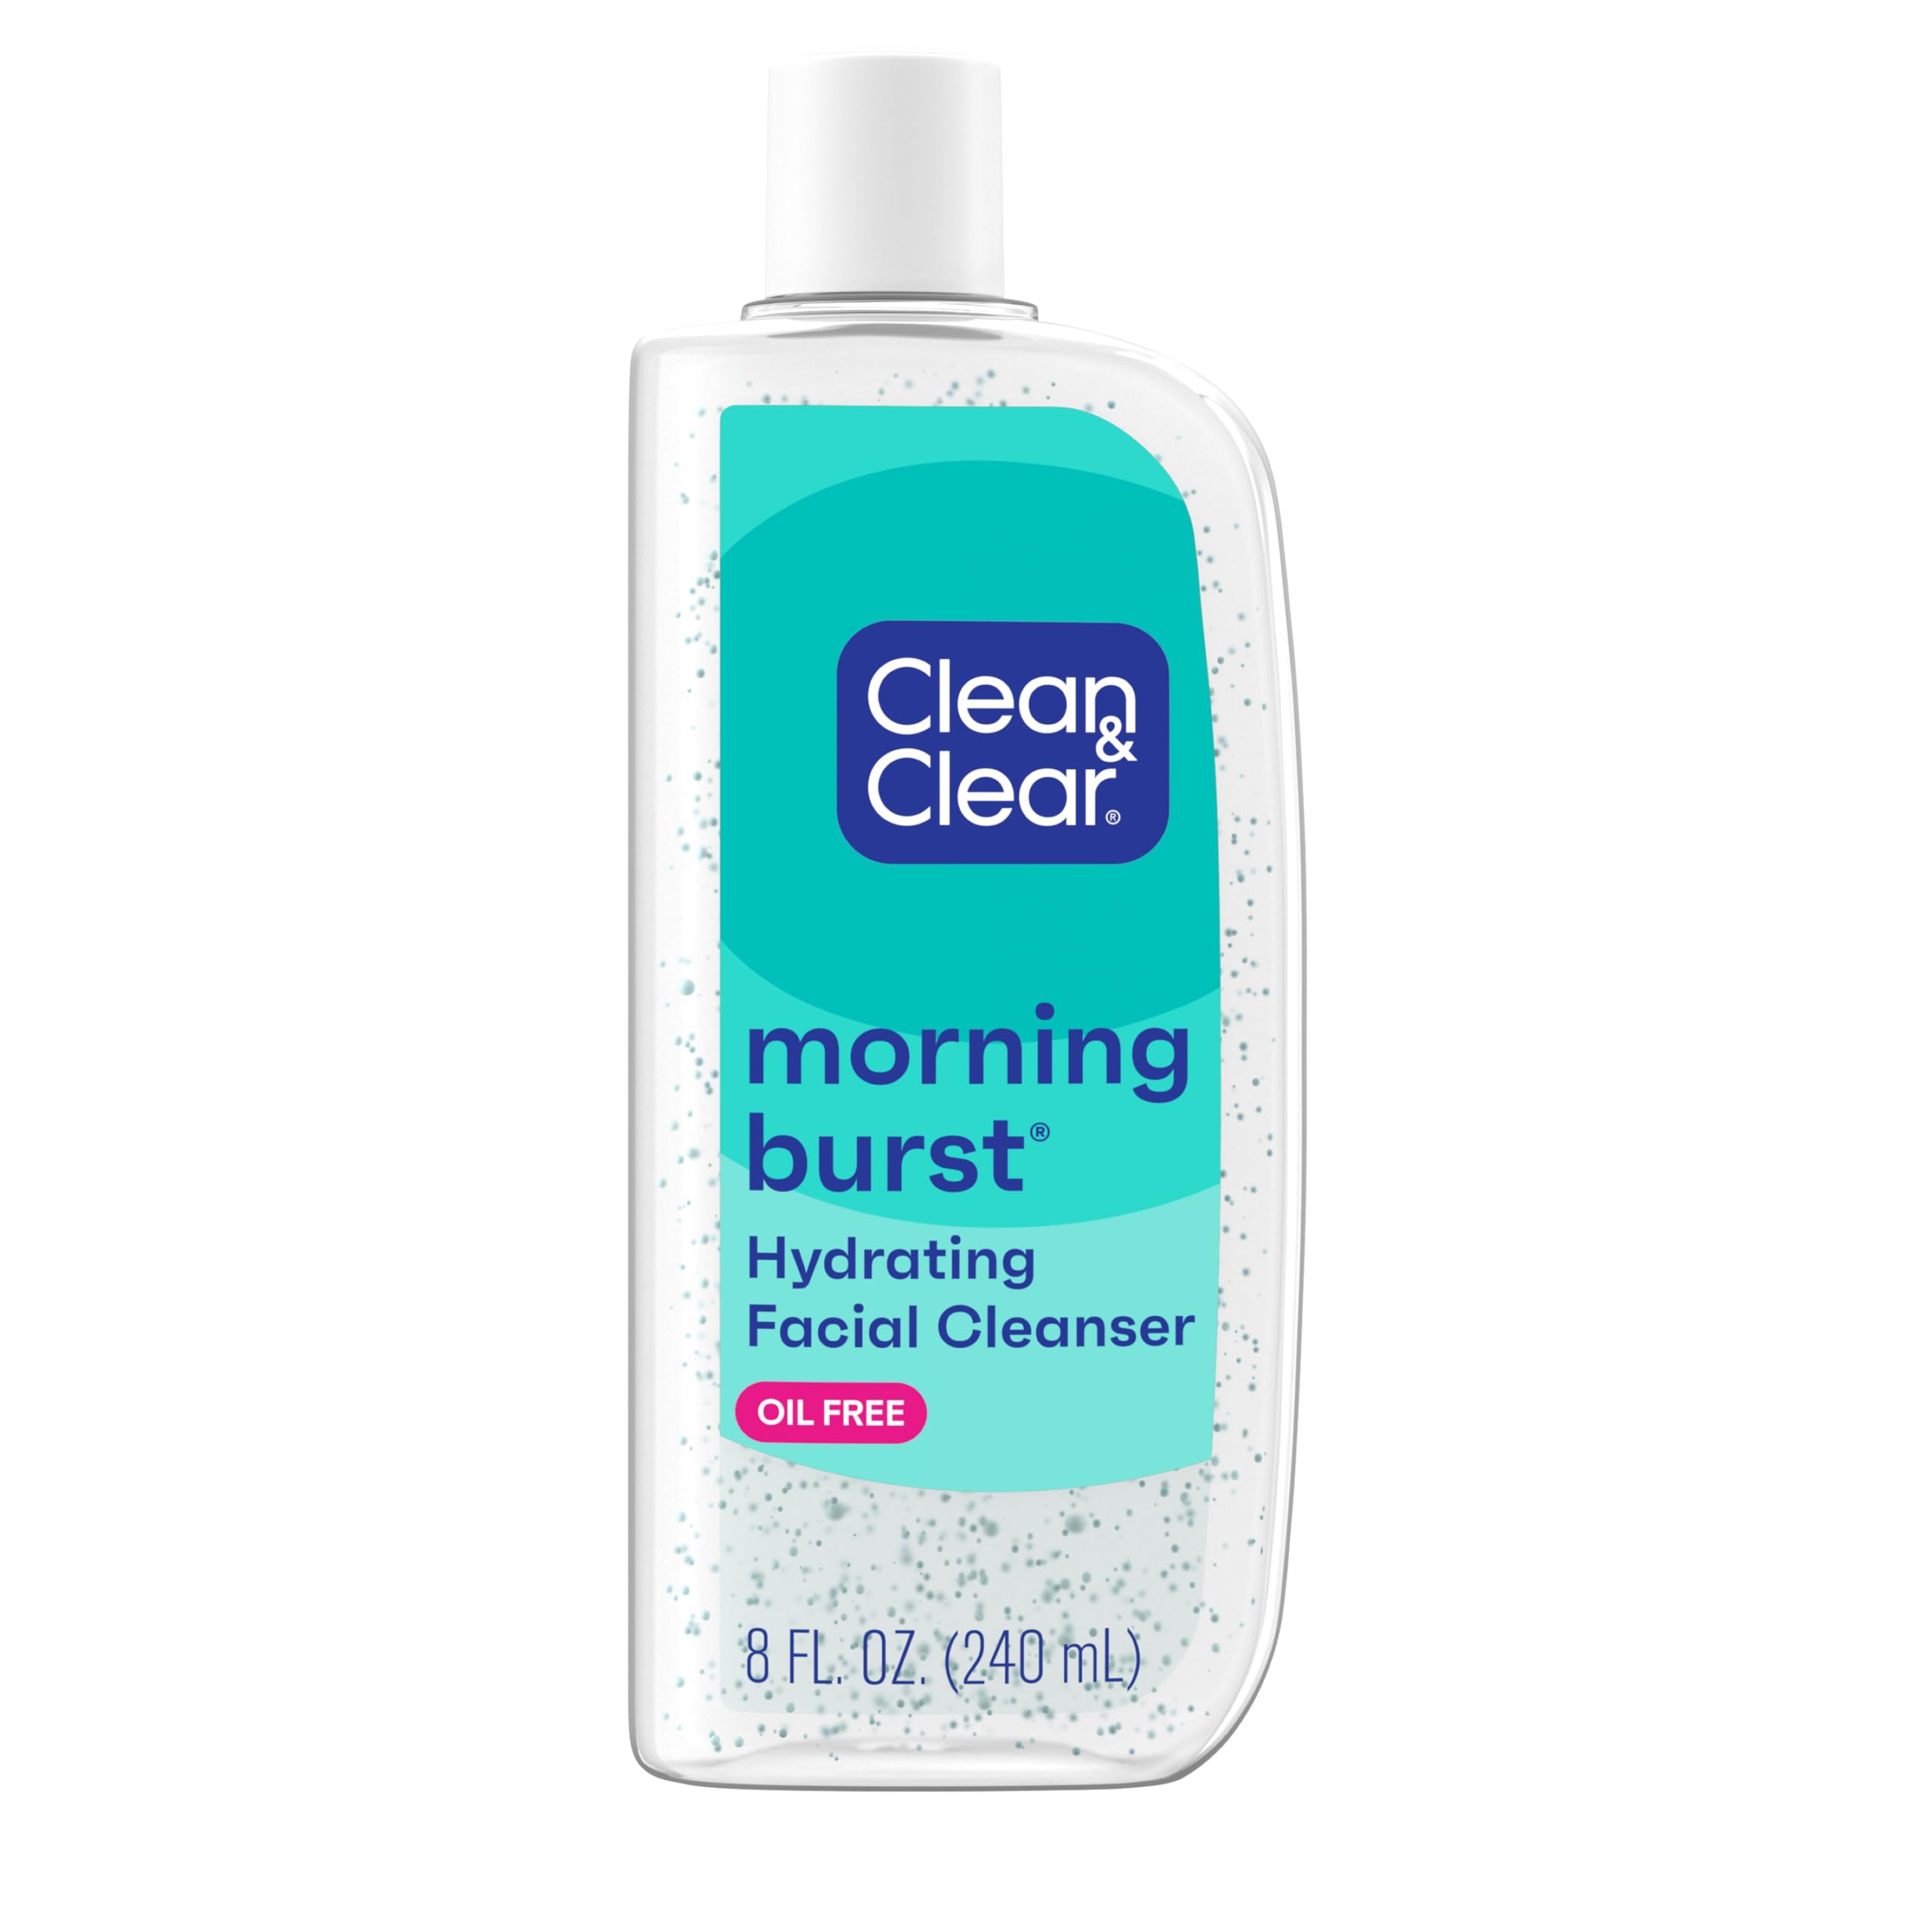 Clean & Clear Morning Burst Hydrating Facial Cleanser, 8 fl. oz., with BHA, Cucumber, and Aloe [Subscribe & Save] $5.67 @ Amazon